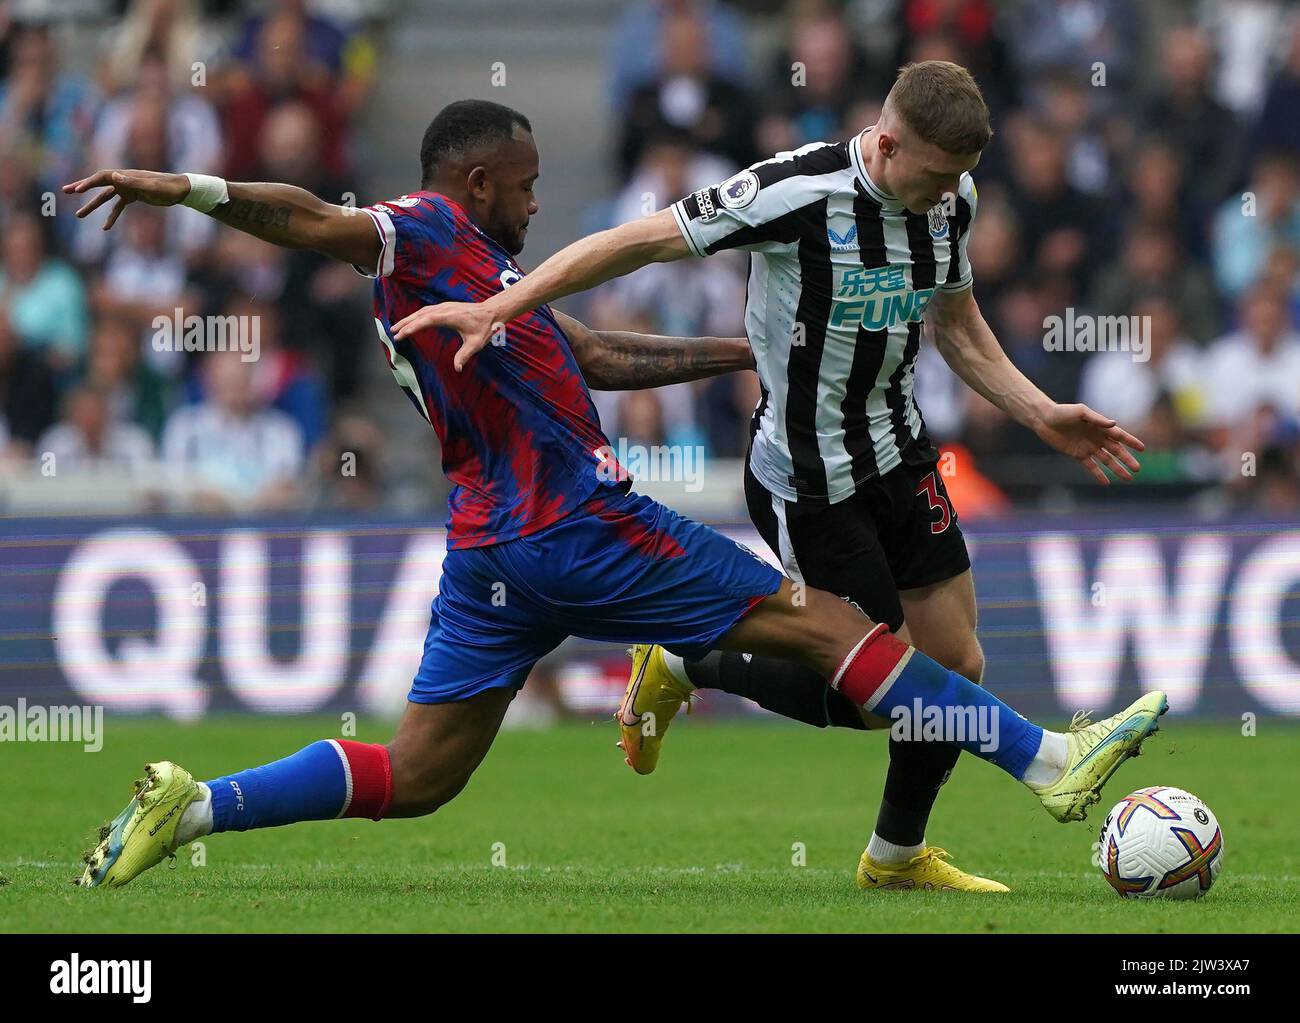 Crystal Palace's Jordan Ayew challenges Newcastle United's Elliot Anderson during the Premier League match at St. James' Park, Newcastle. Picture date: Saturday September 3, 2022. Stock Photo